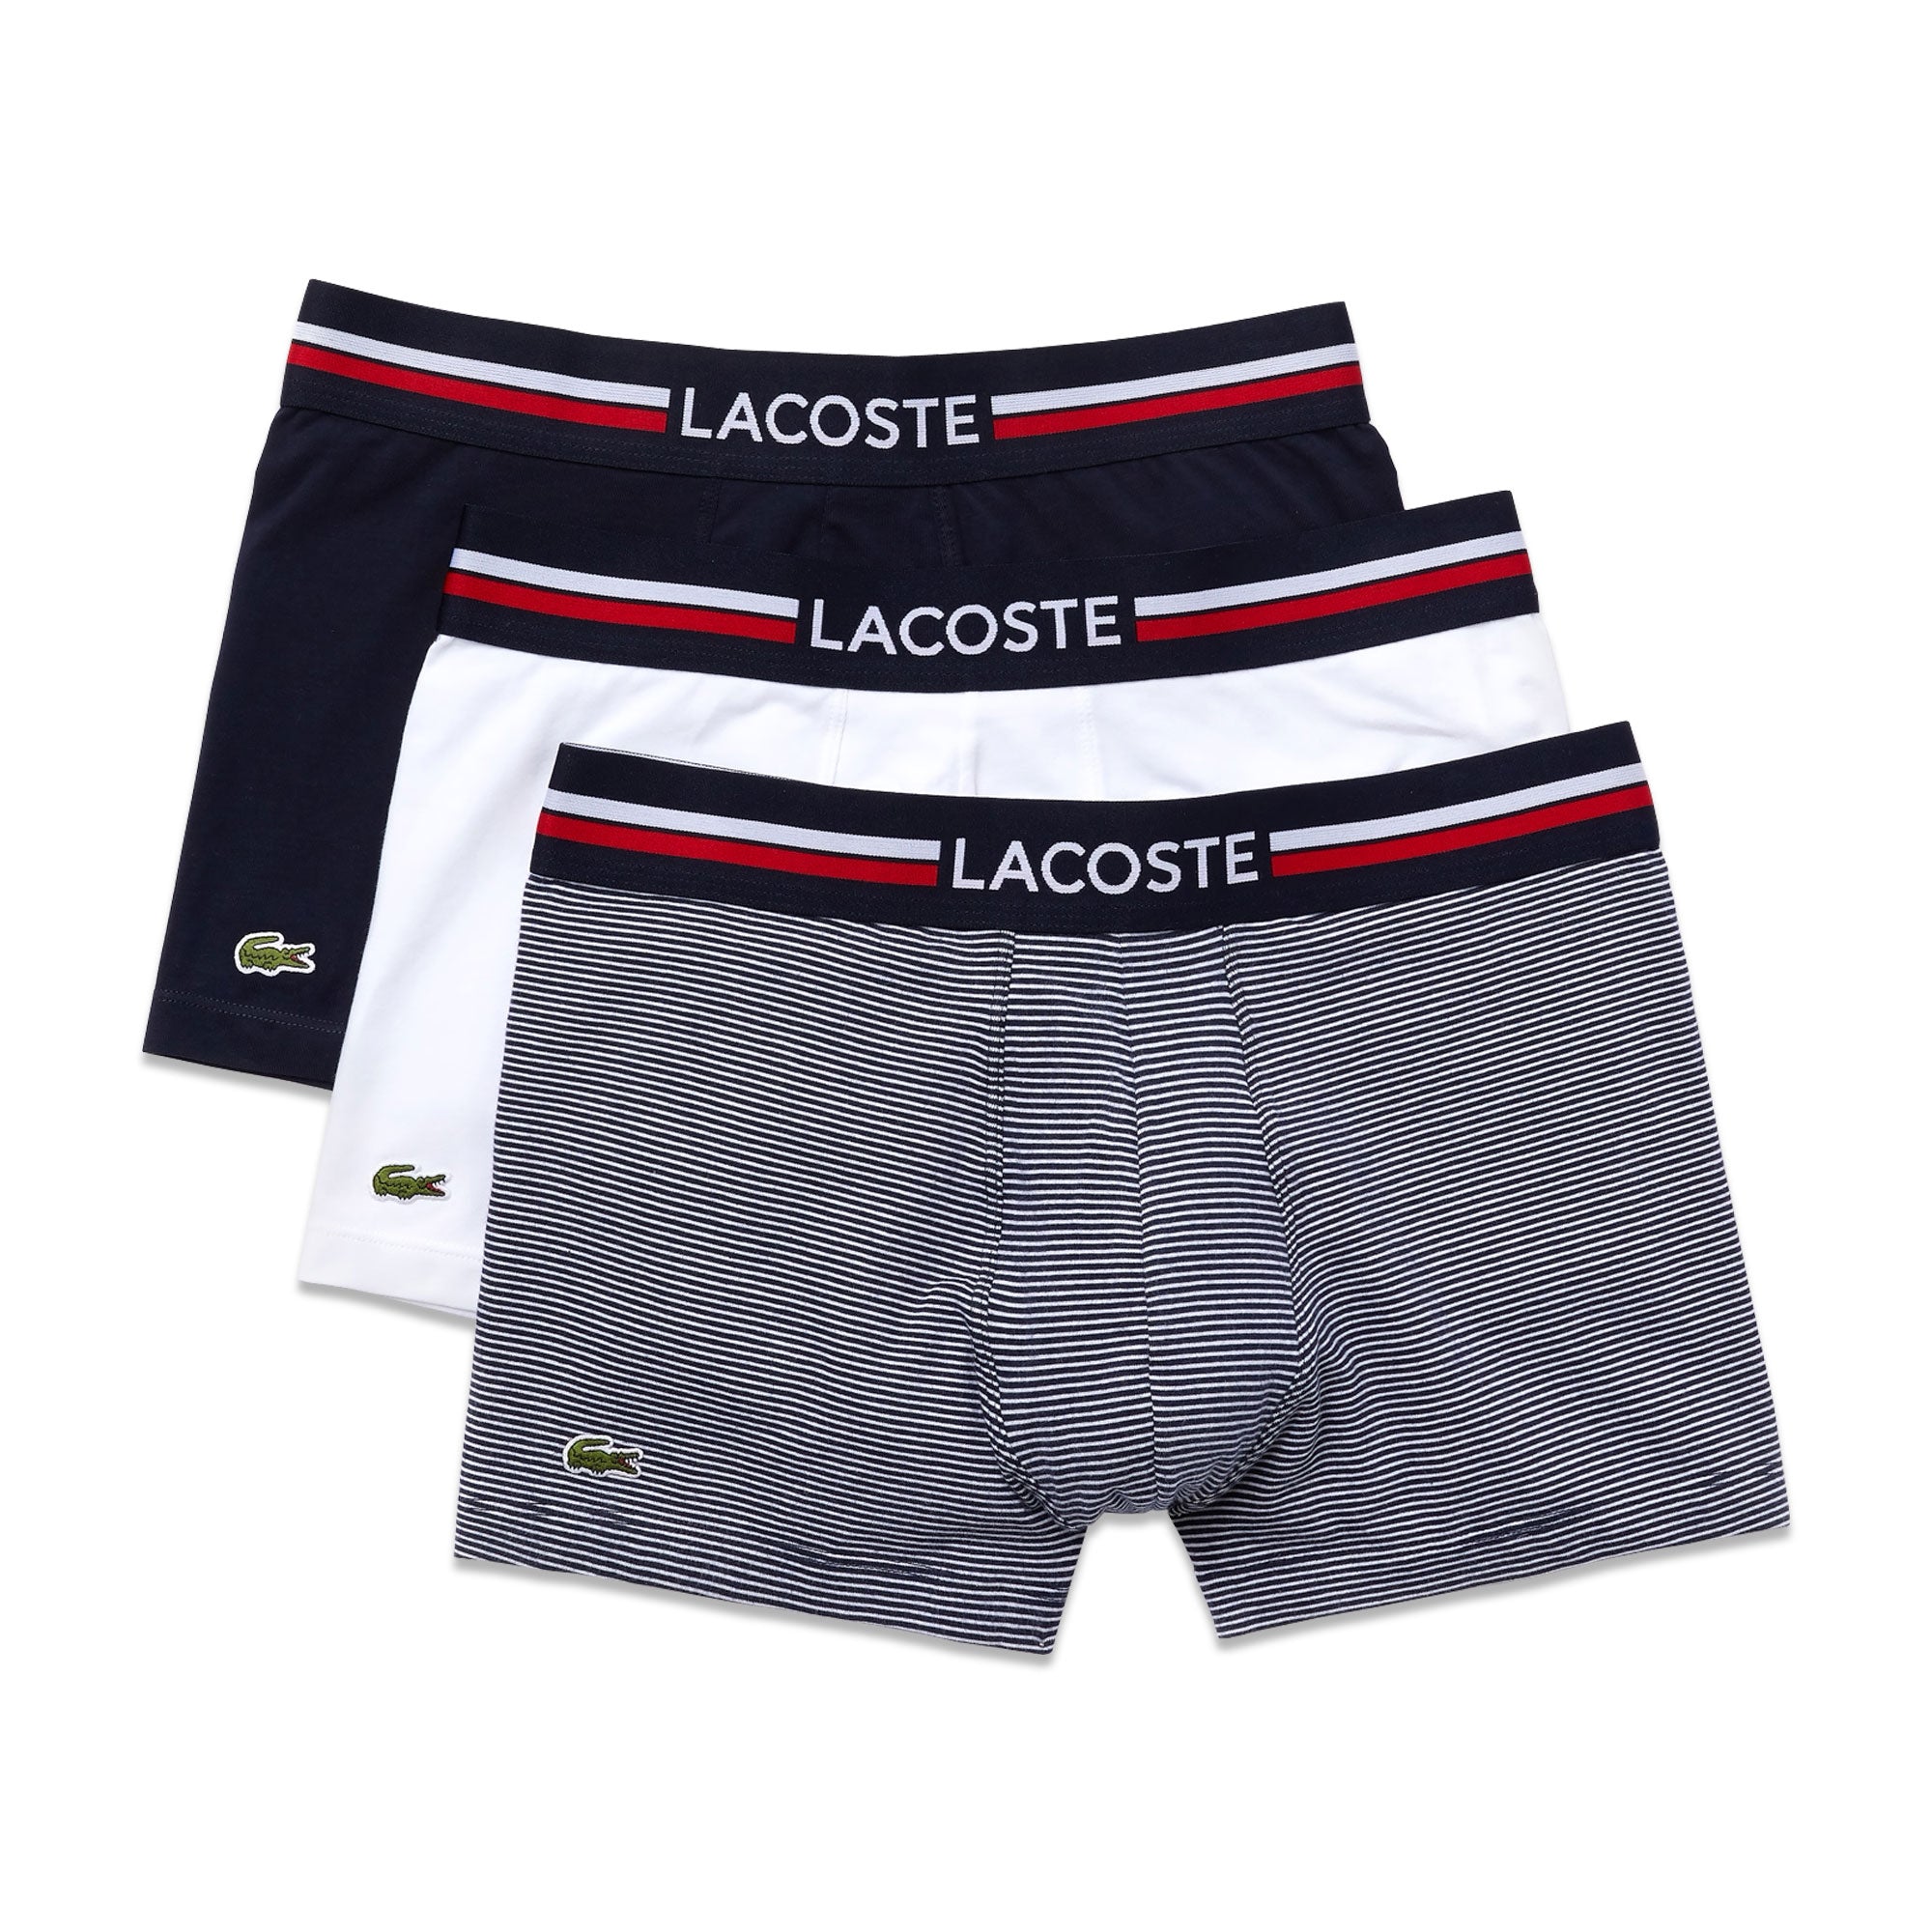 Lacoste 3 Pack Cotton Stretch Trunks - Navy/White/Stripe